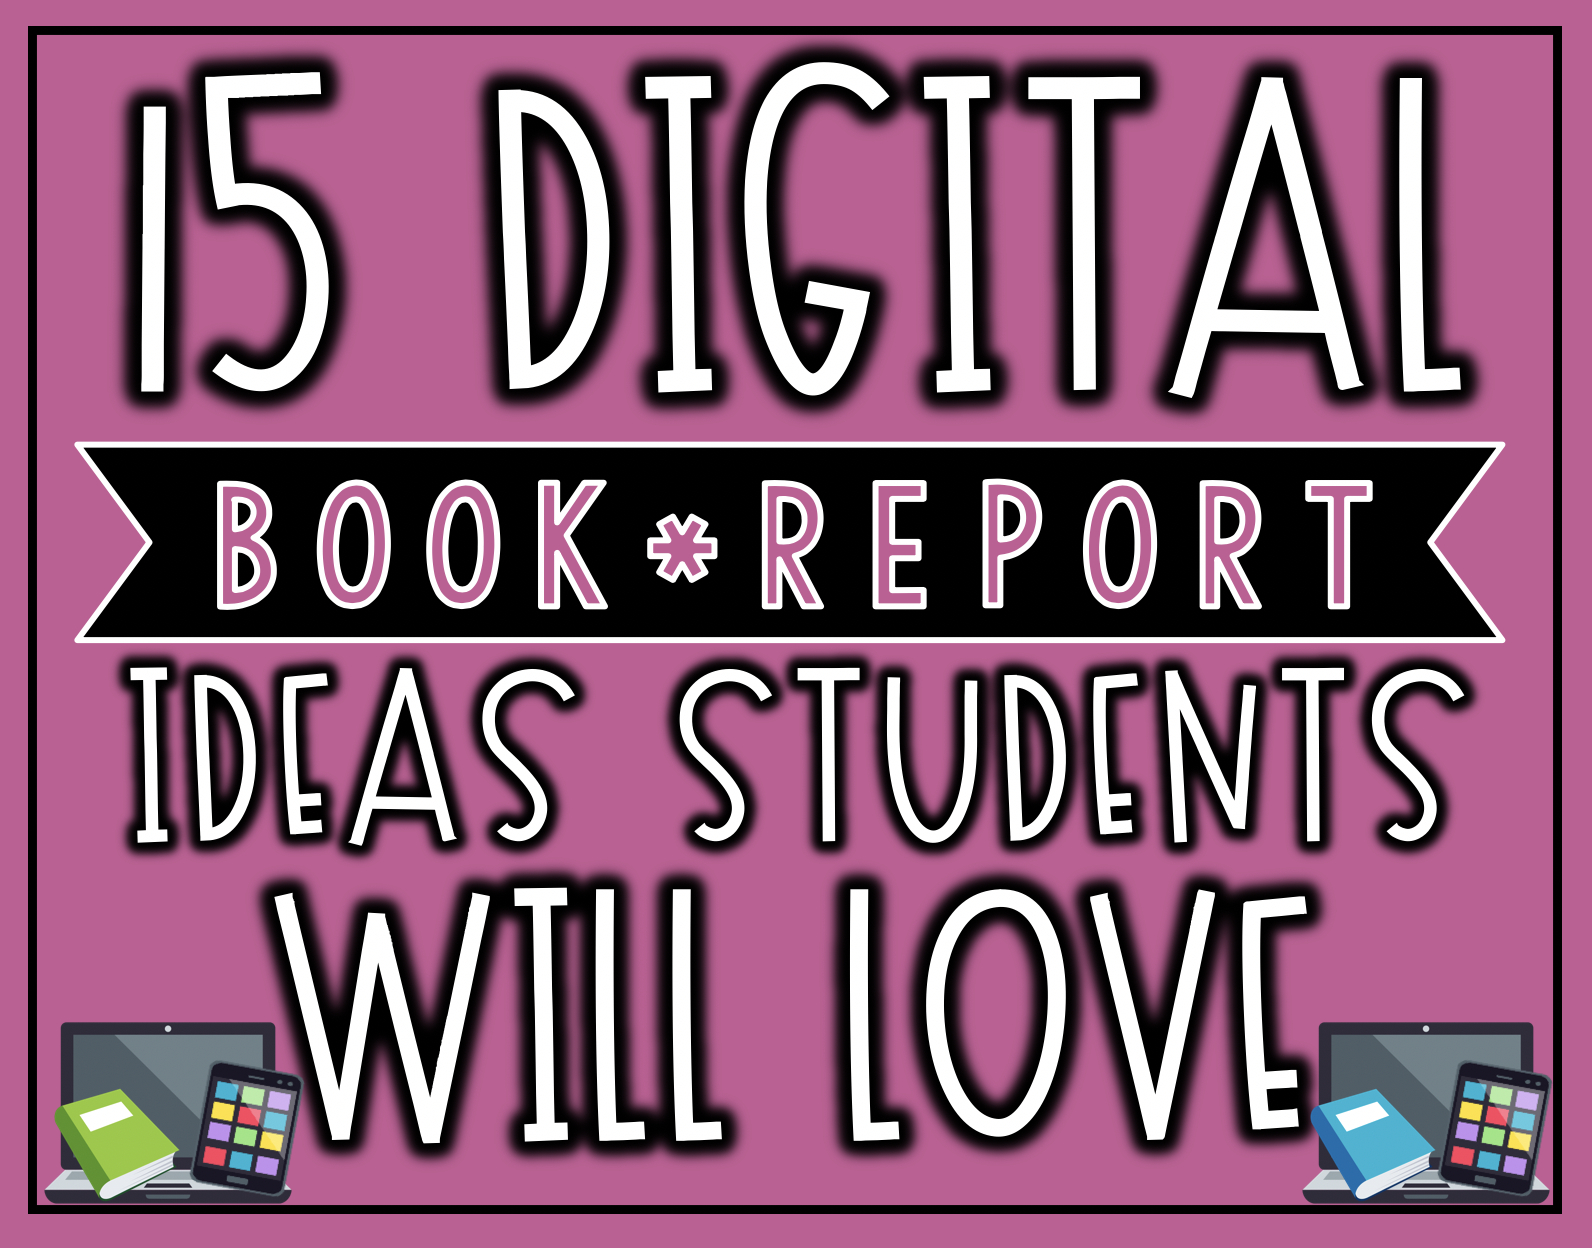 15 Digital Book Report Ideas Your Students Will Love | The Throughout Book Report Template In Spanish